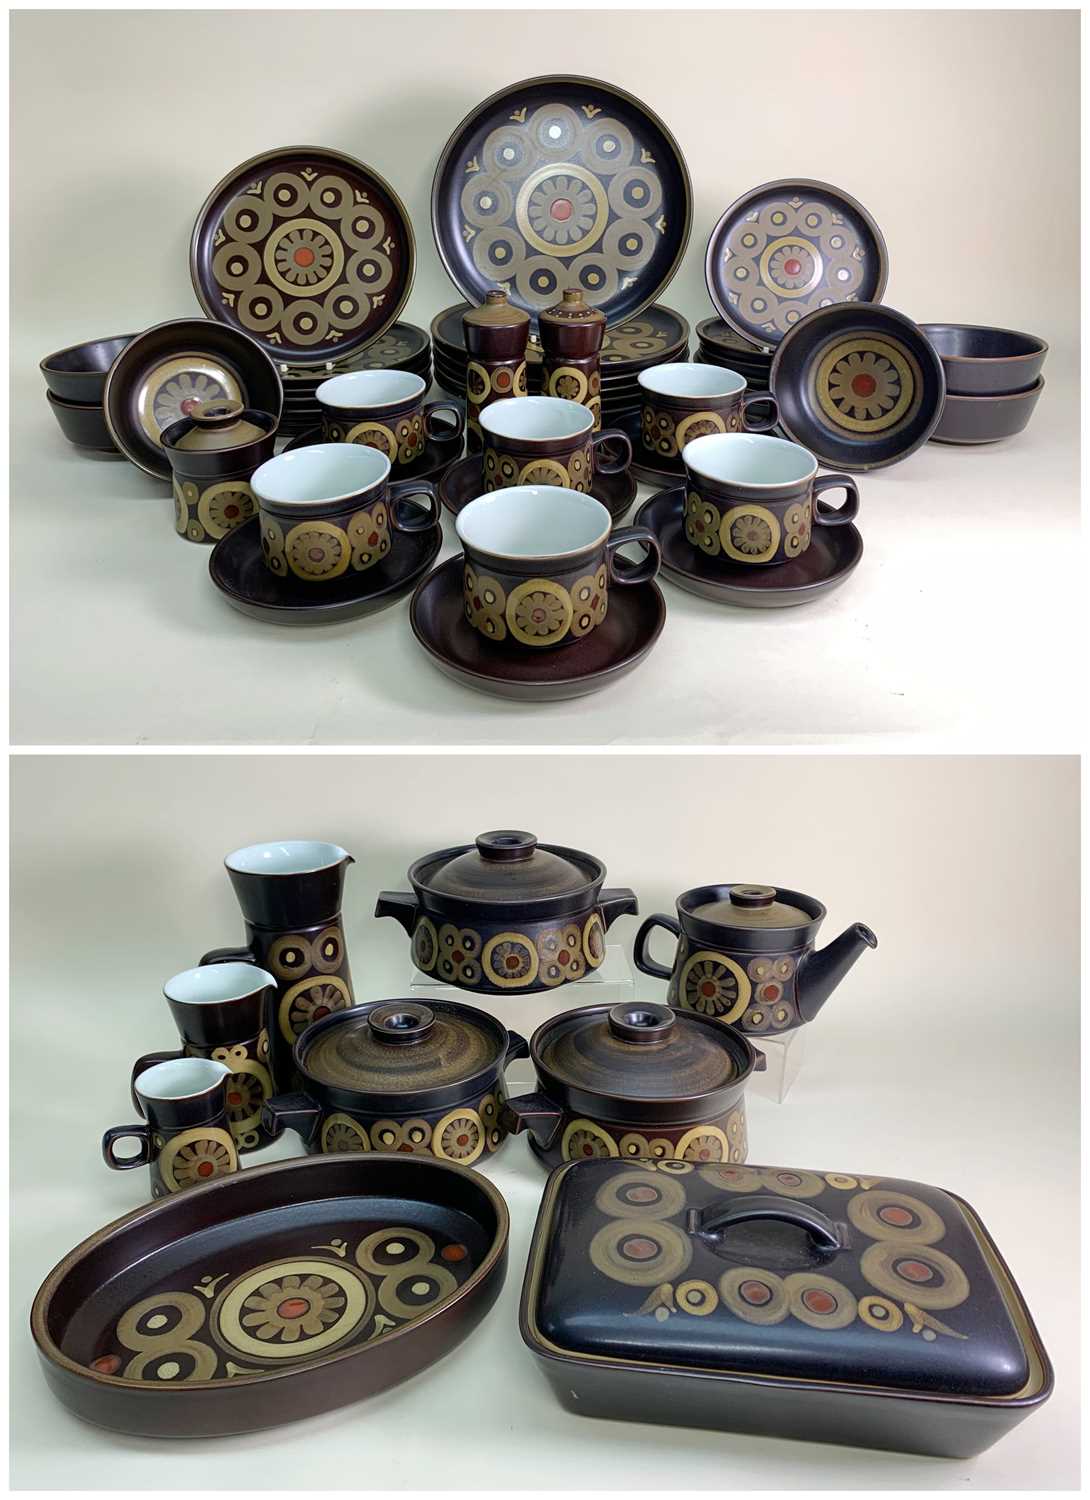 MID CENTURY DENBY TABLEWARE, Arabesque pattern designed by Gill Pemberton and in production from